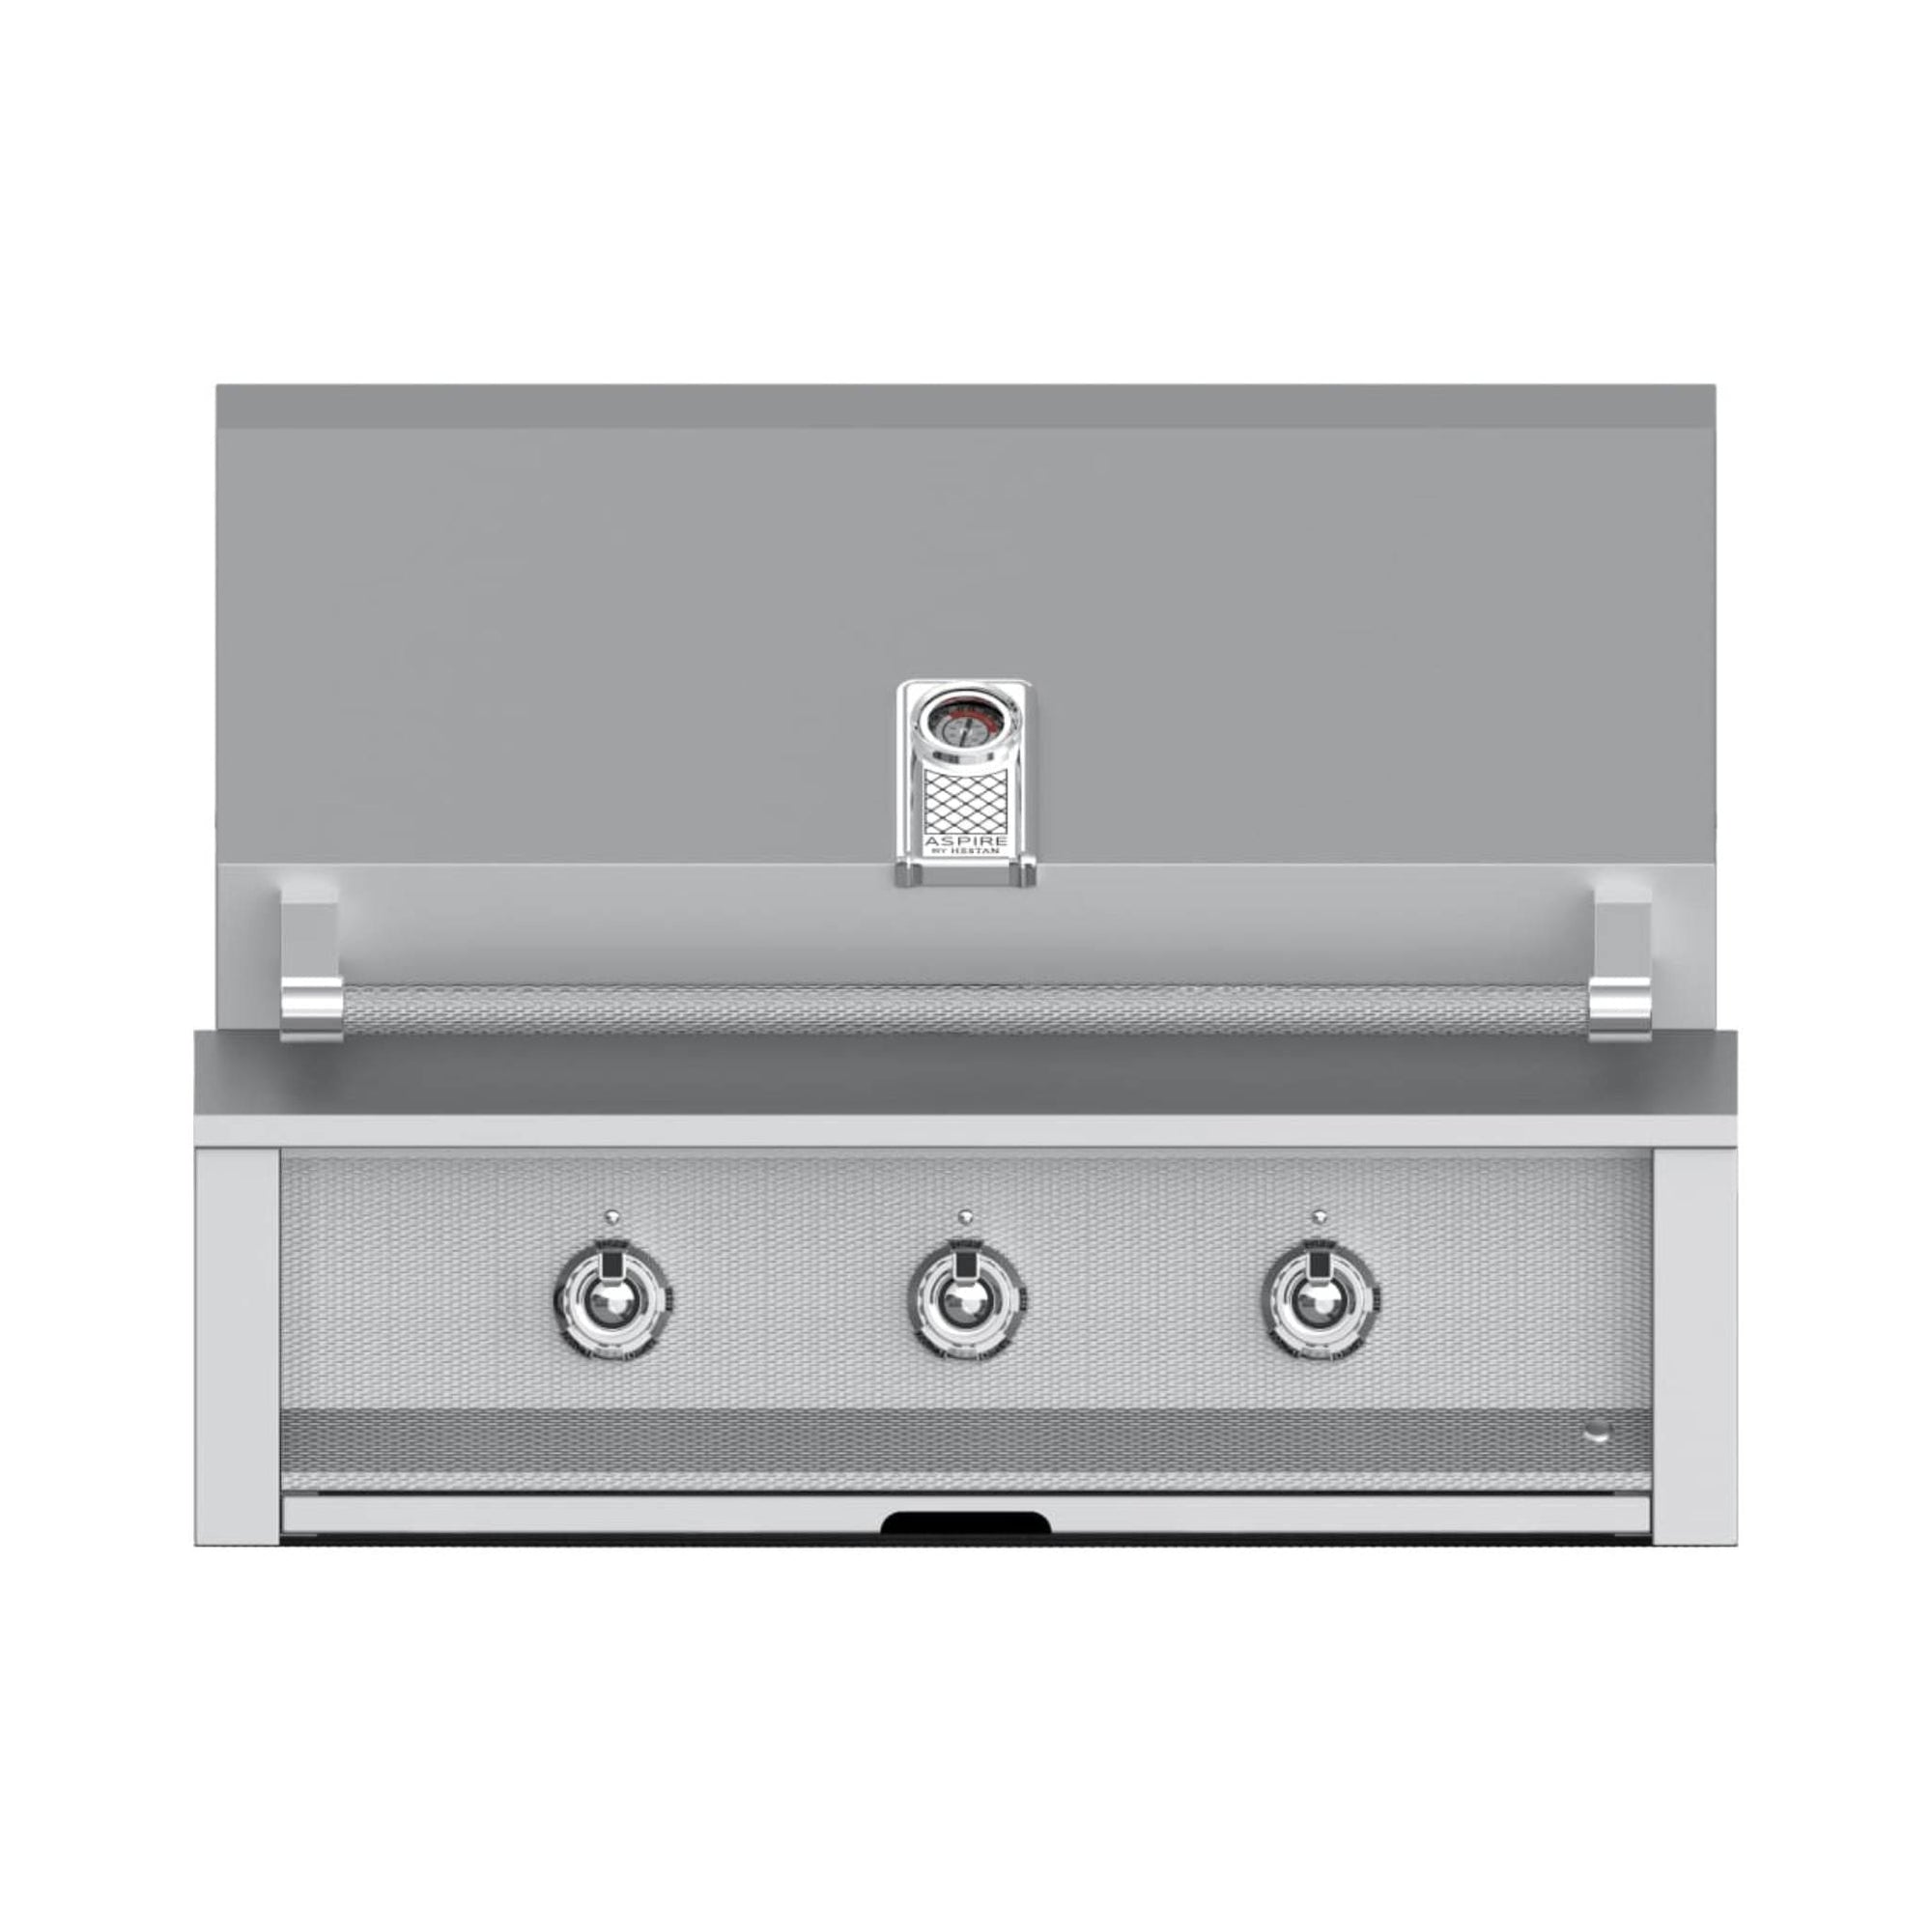 Aspire by Hestan 36" Built-In Aspire Grill, (1) Sear - Culinary Hardware